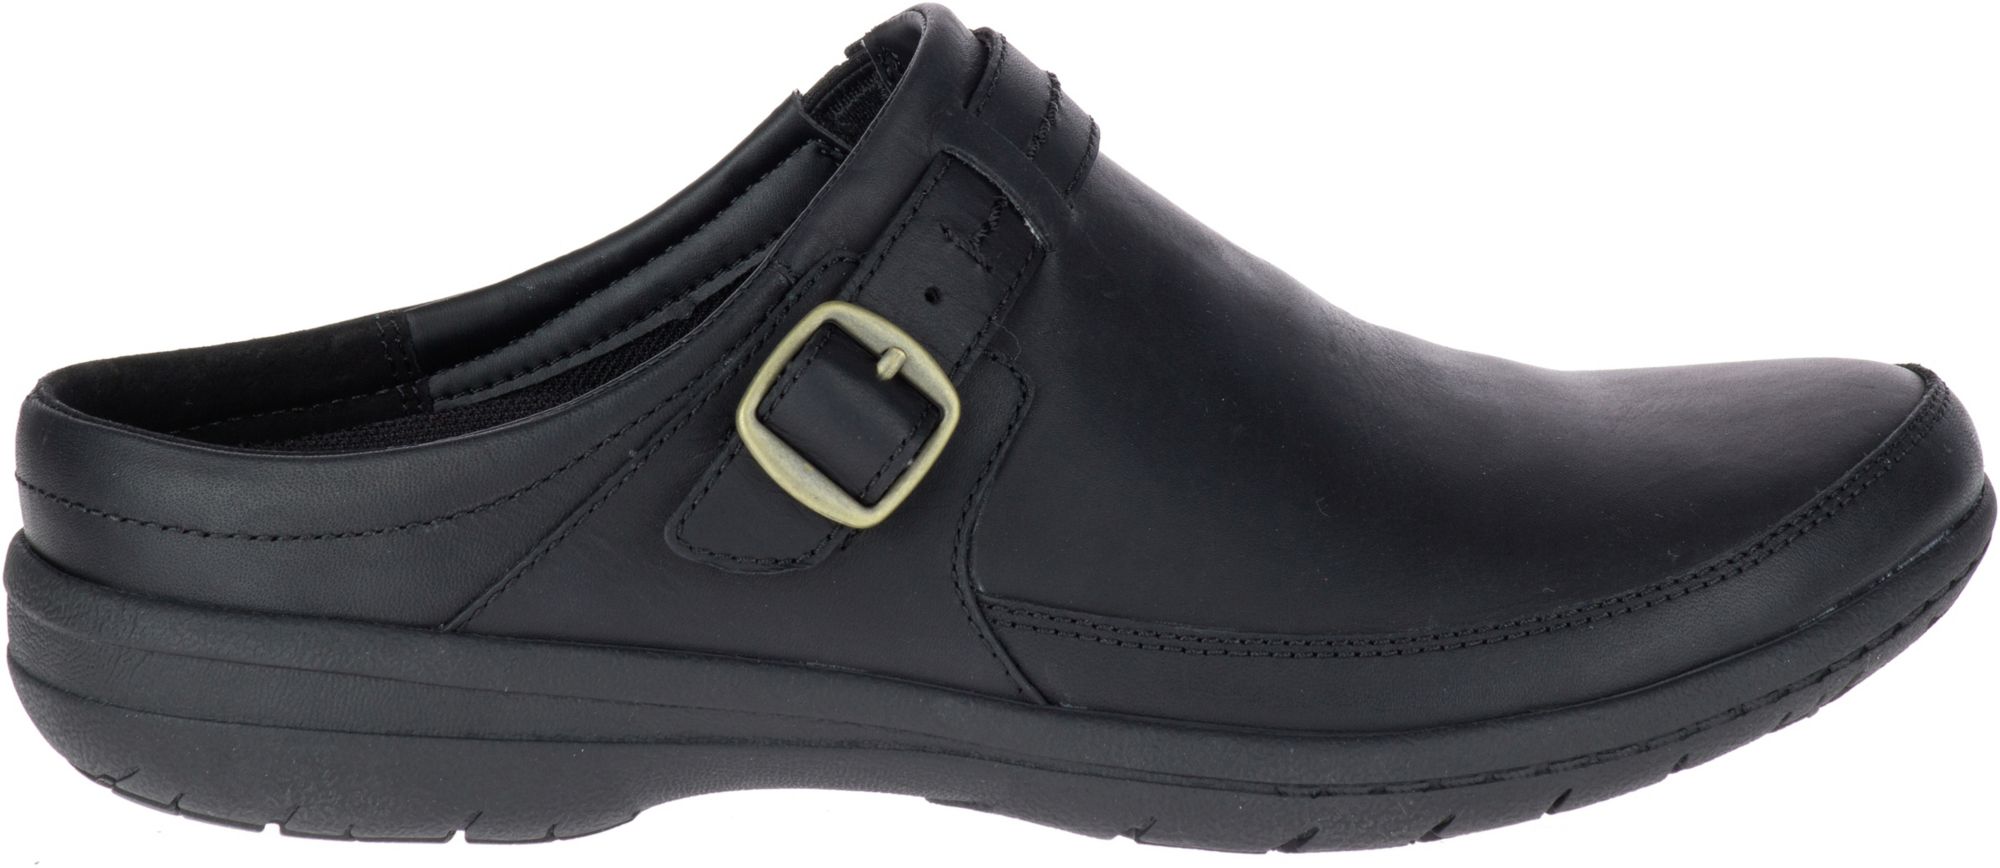 Women's Casual & Boat Shoes | DICK'S Sporting Goods